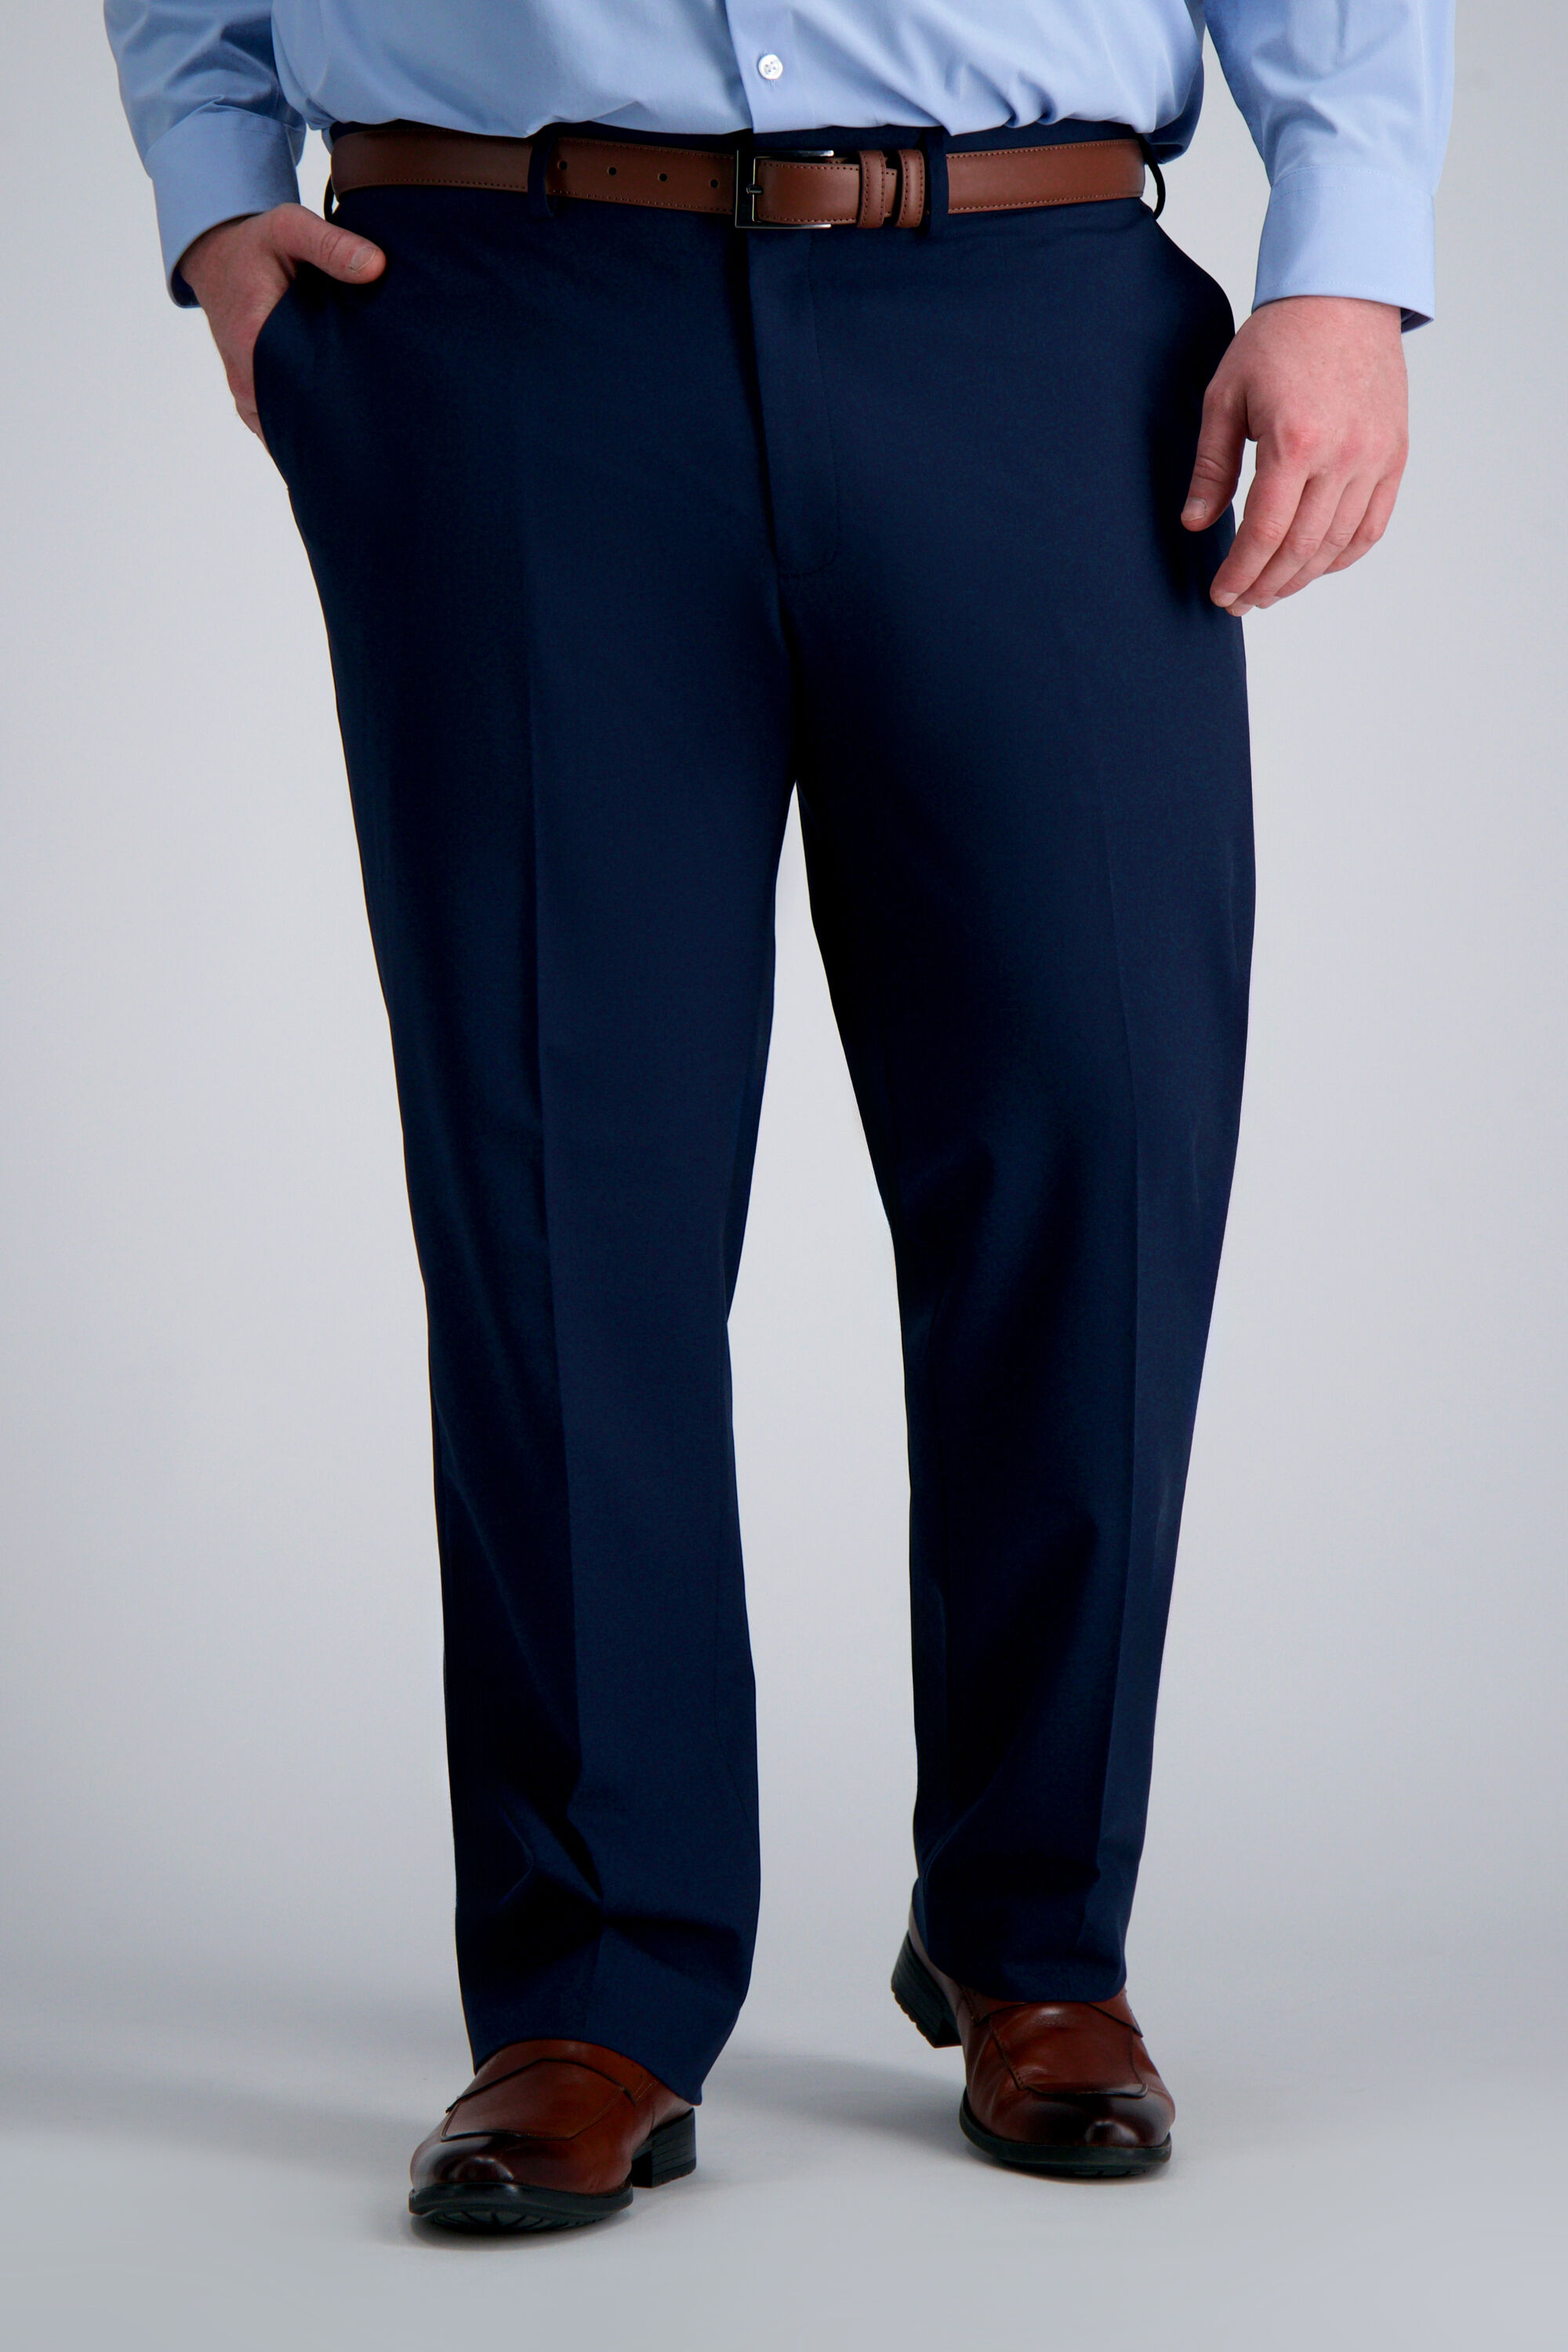 J.M. Haggar Big & Tall Suit Pant Blue One Size